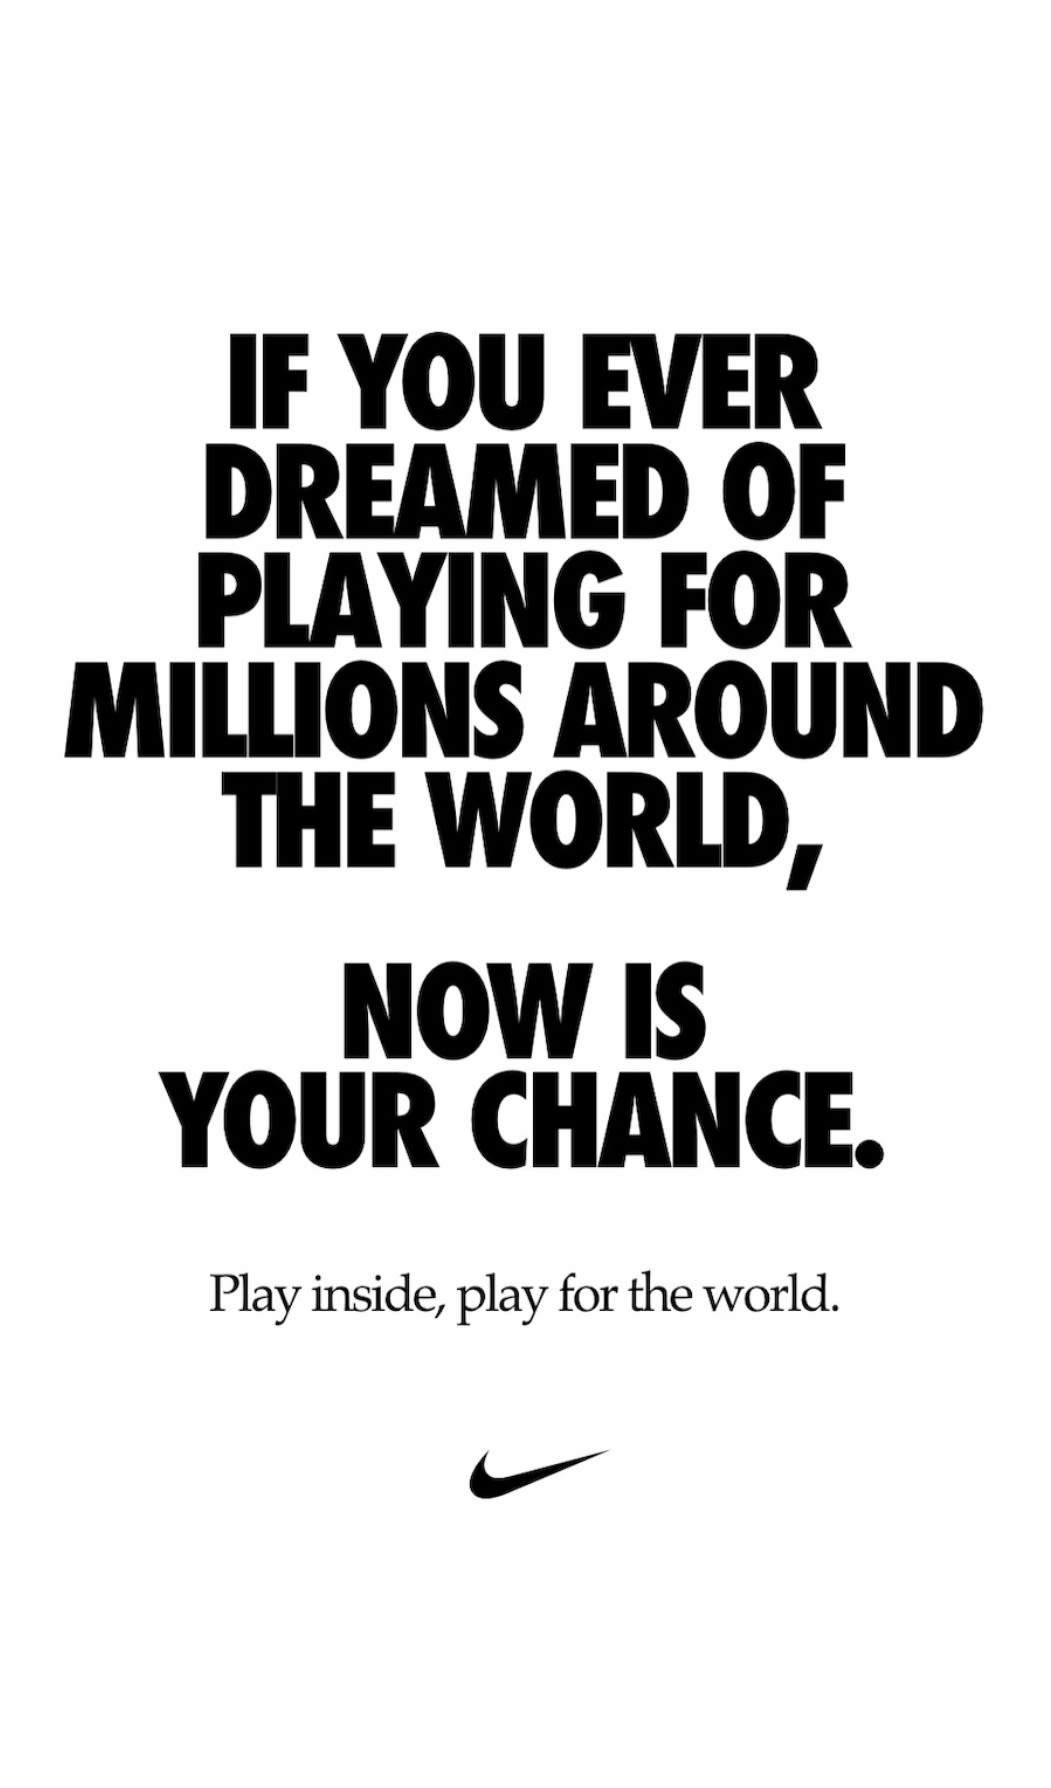 NIke Play Inside, Play For the World